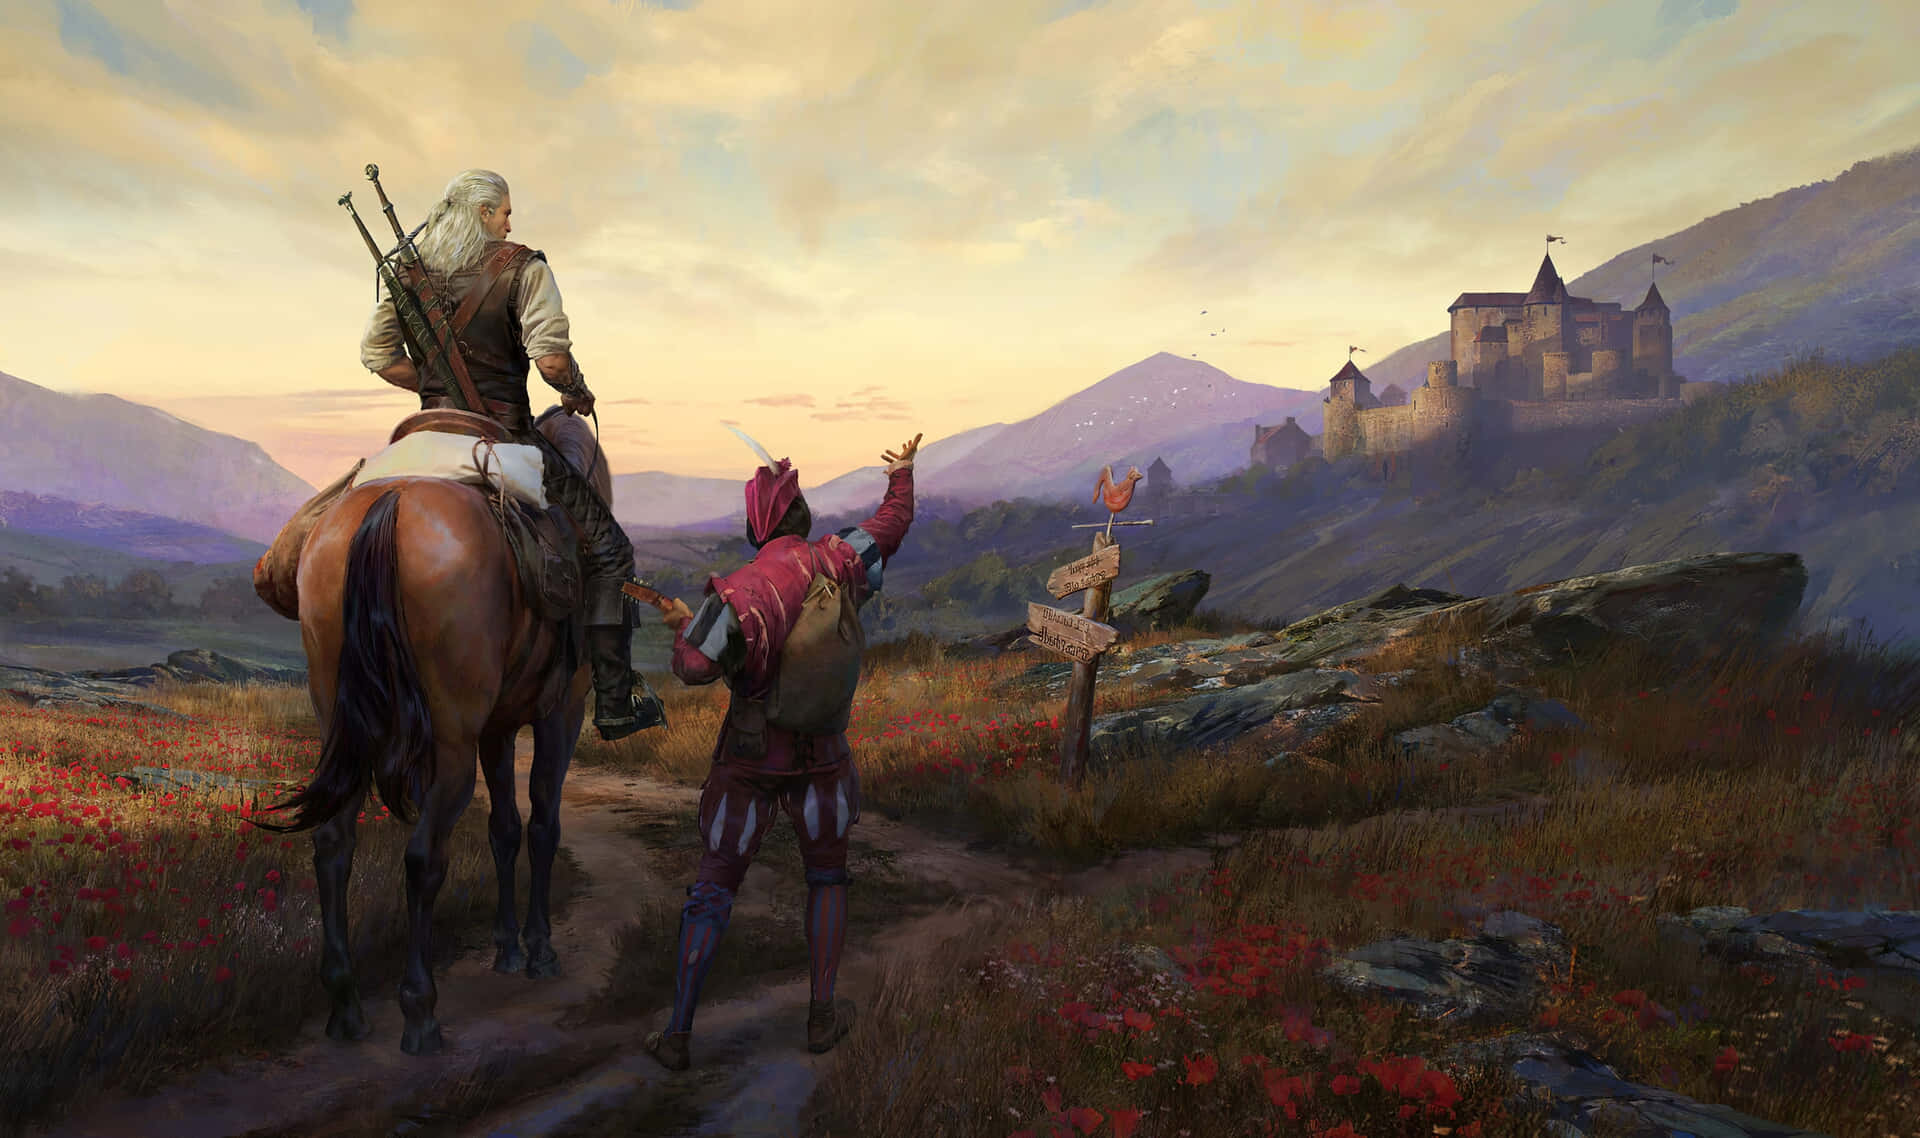 Geralt of Rivia and Roach gallop towards their next adventure